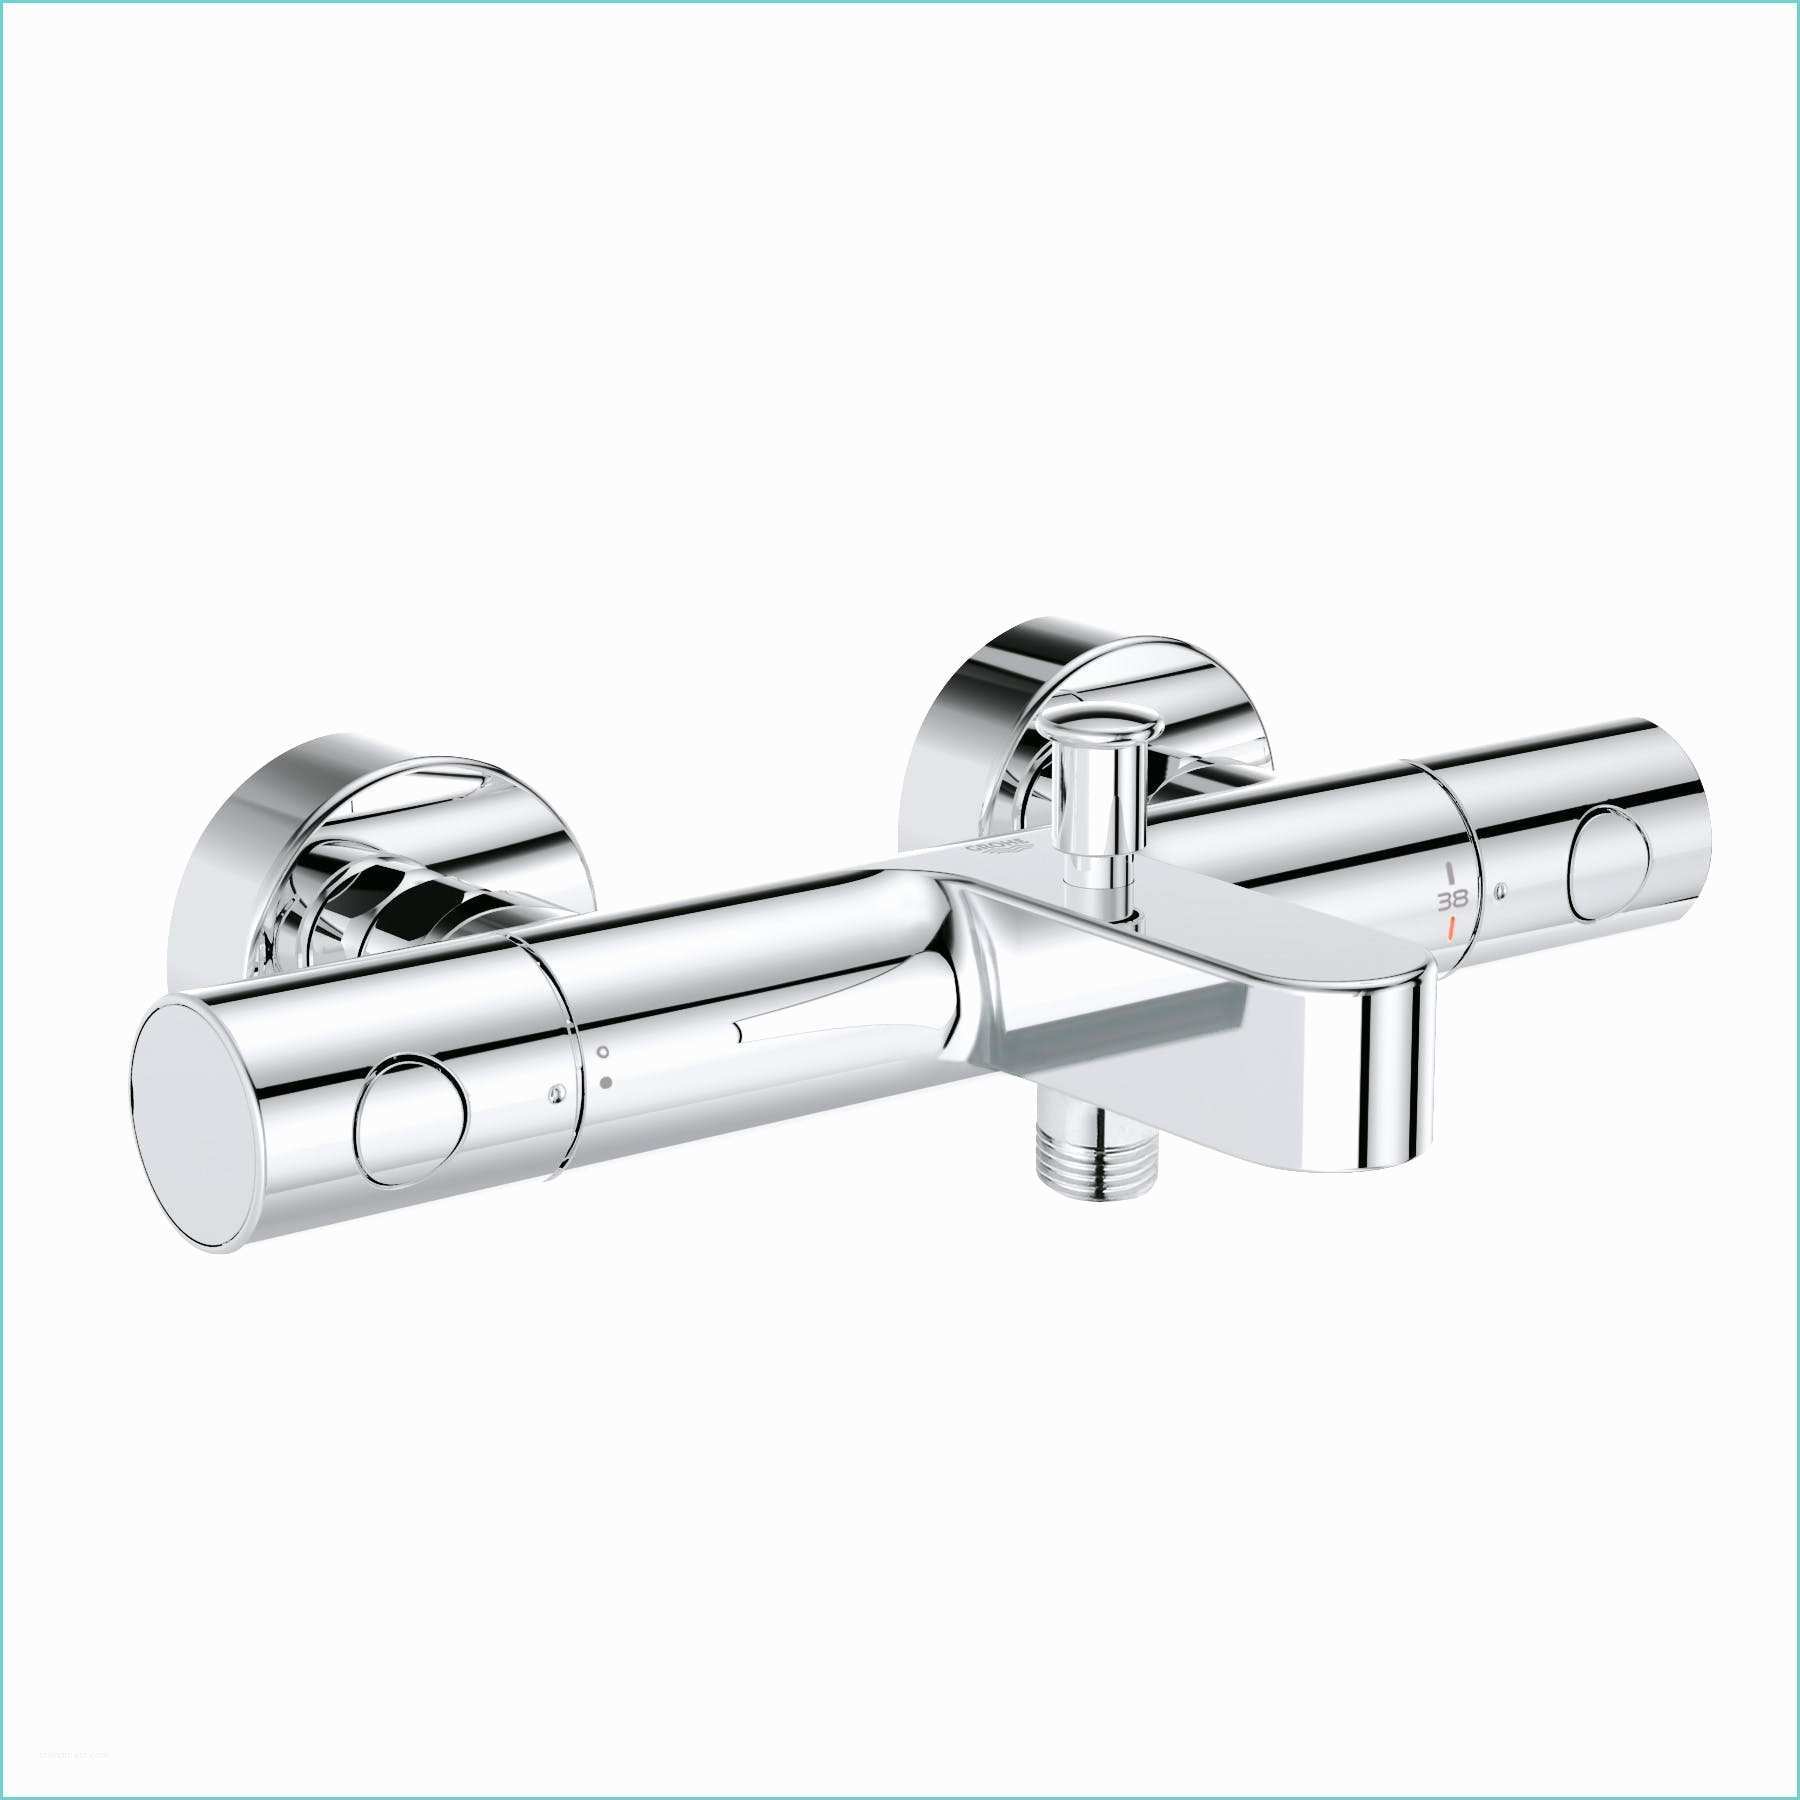 Mitigeur Grohe Douche Grohe Mitigeur Douche